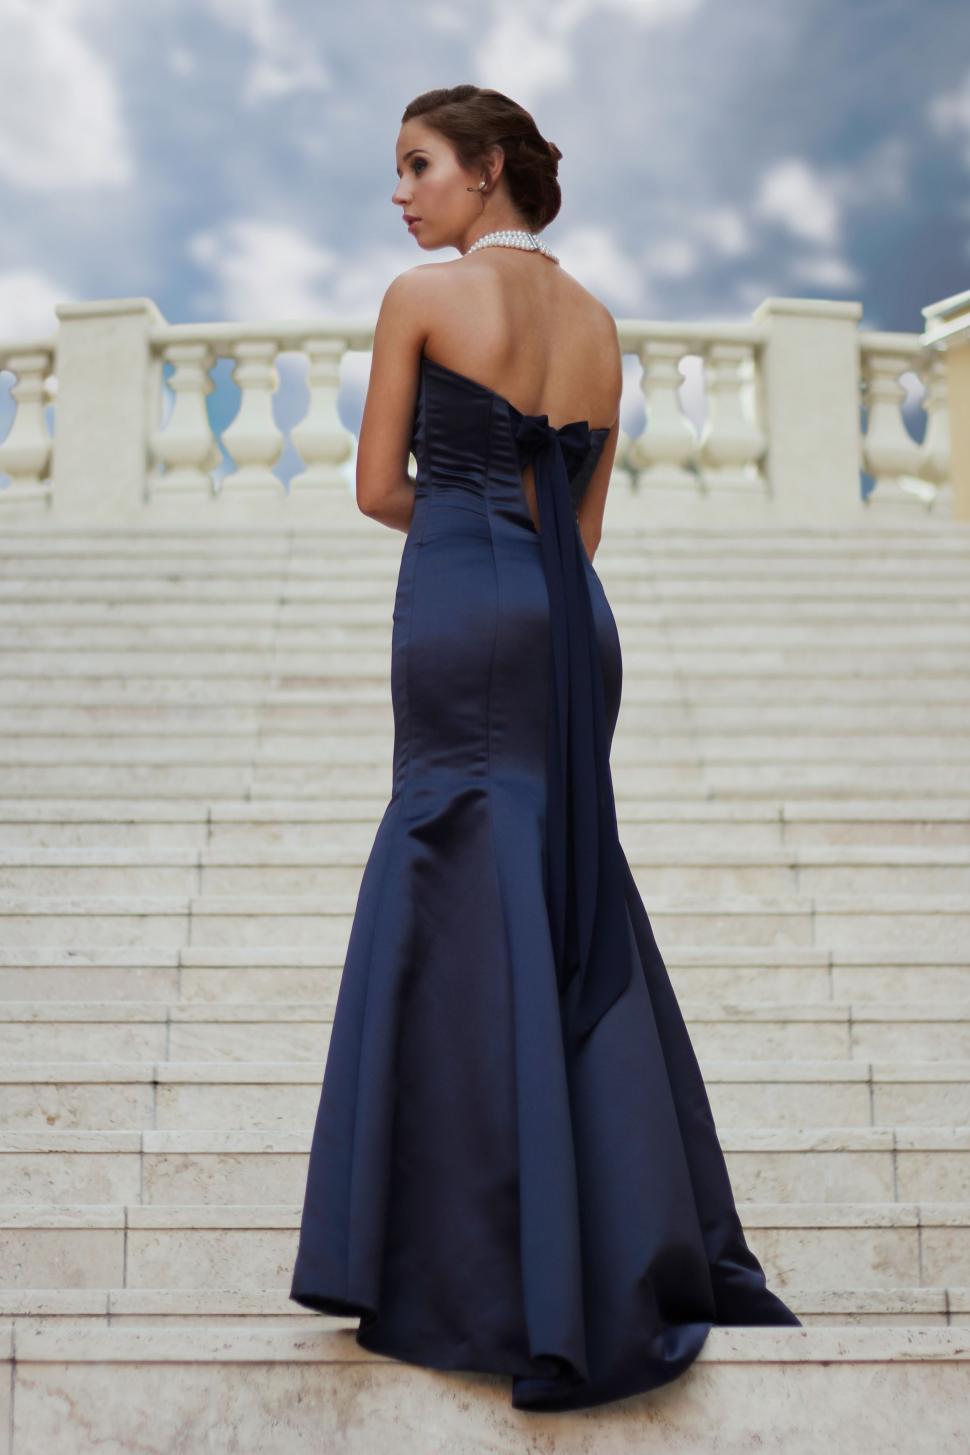 Free Image of Woman in Blue Dress Standing on Steps 